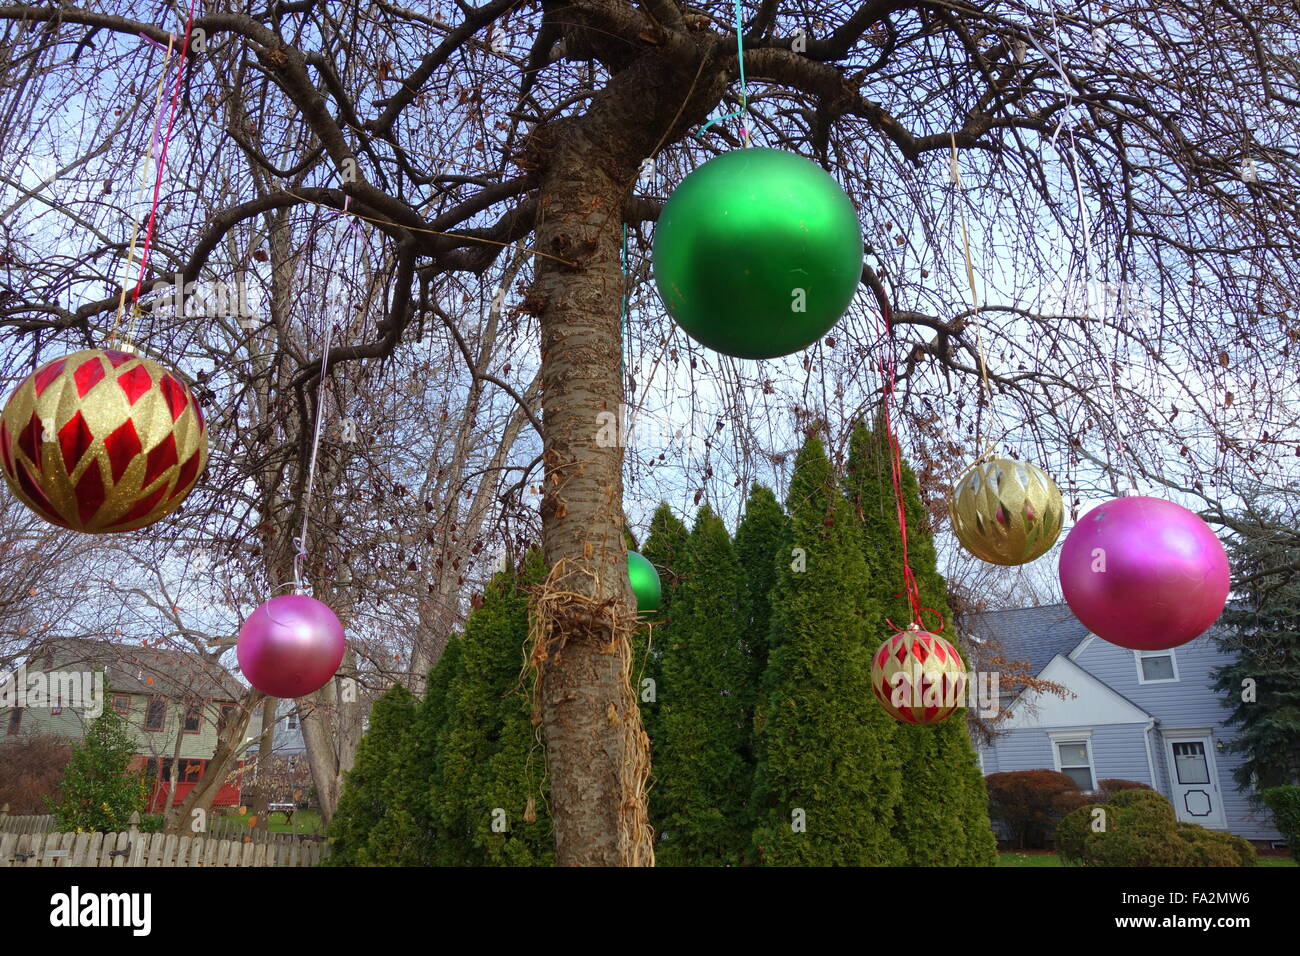 Christmas ornaments hanging on a Weeping Cherry tree Stock Photo